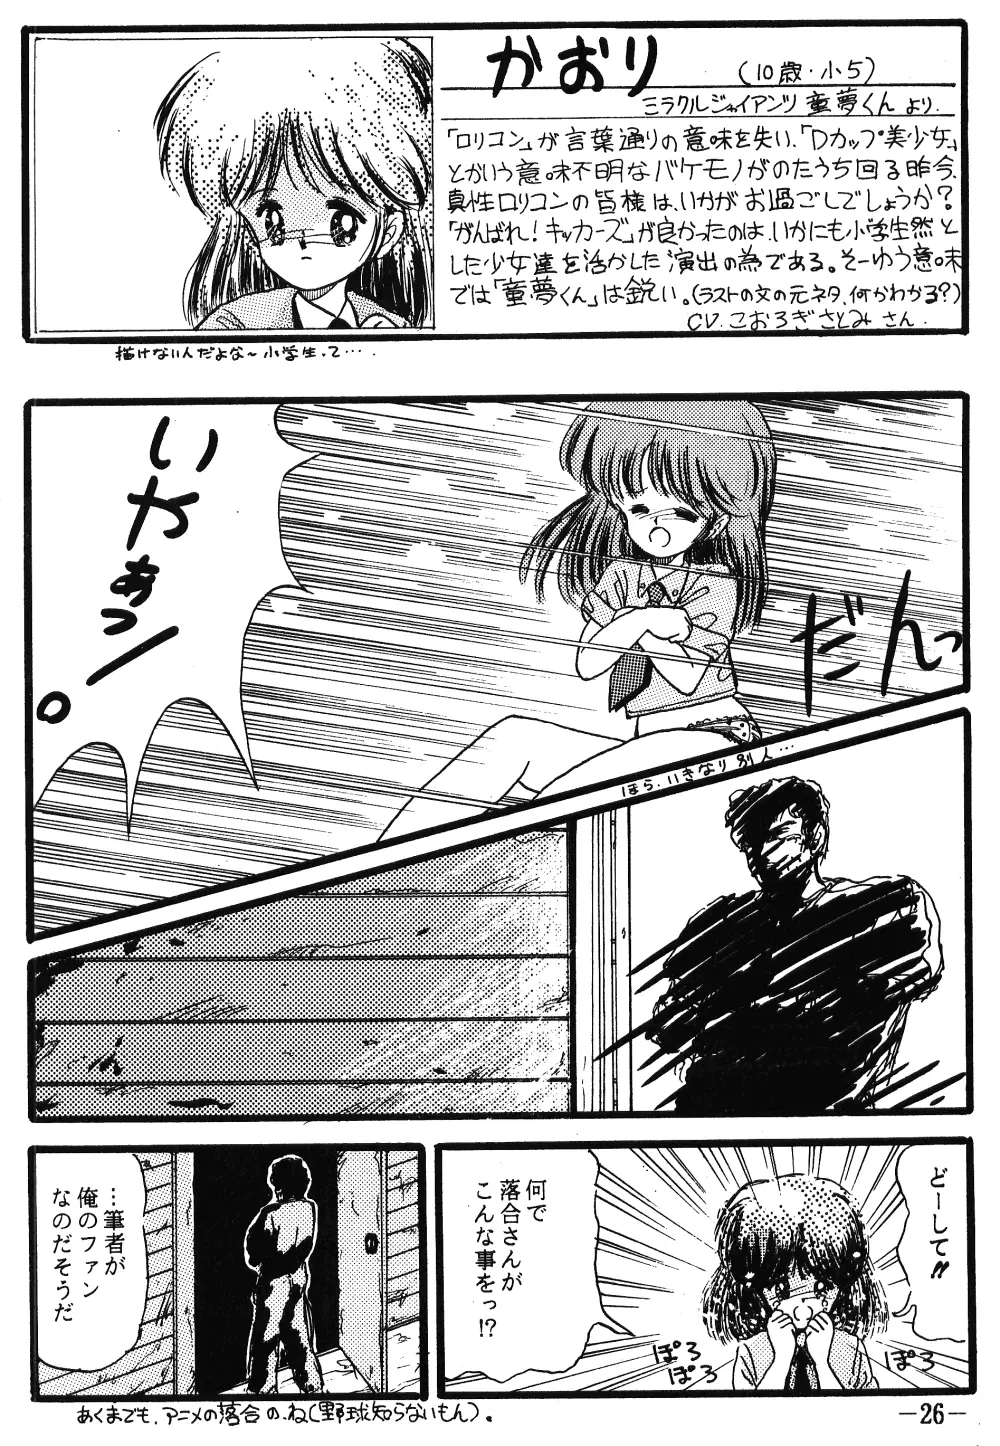 Fro2 Fight Vol. 1 Page.26